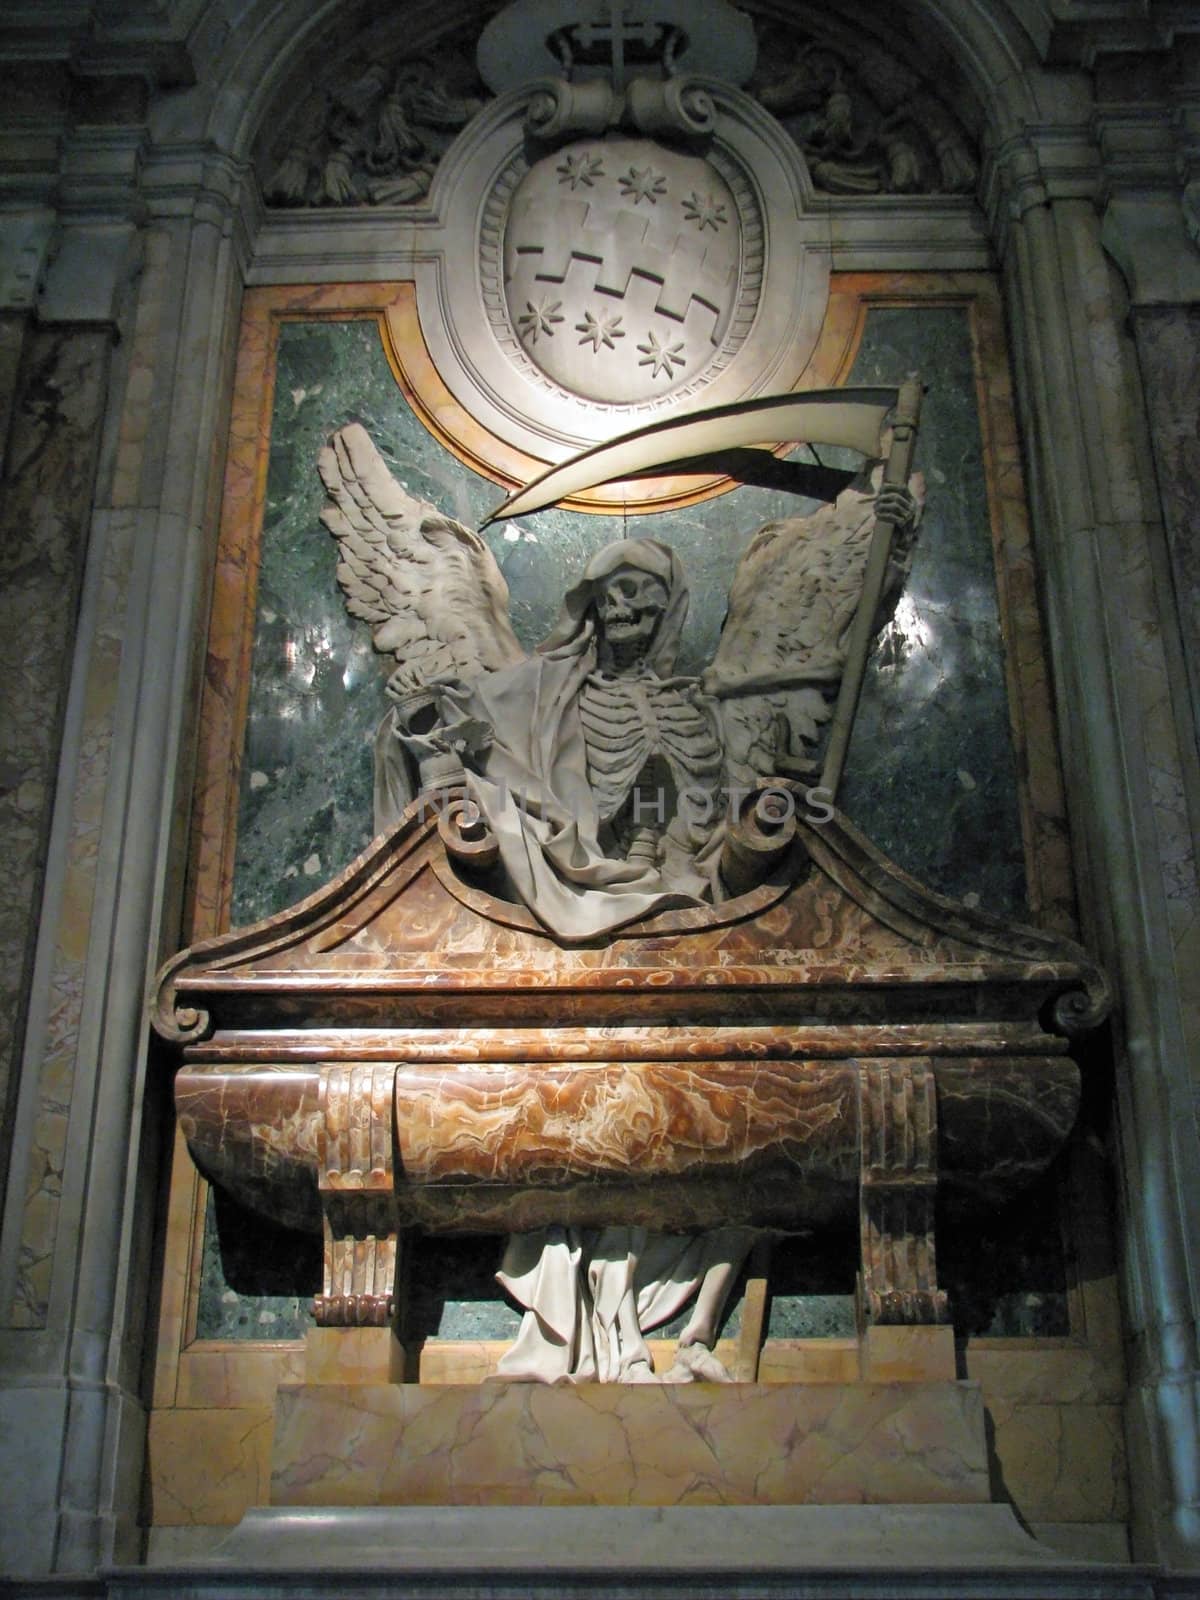 A statue of the Grime Reaper the Angel of Death in St. Peter in Chains Church in Rome, Italy.
